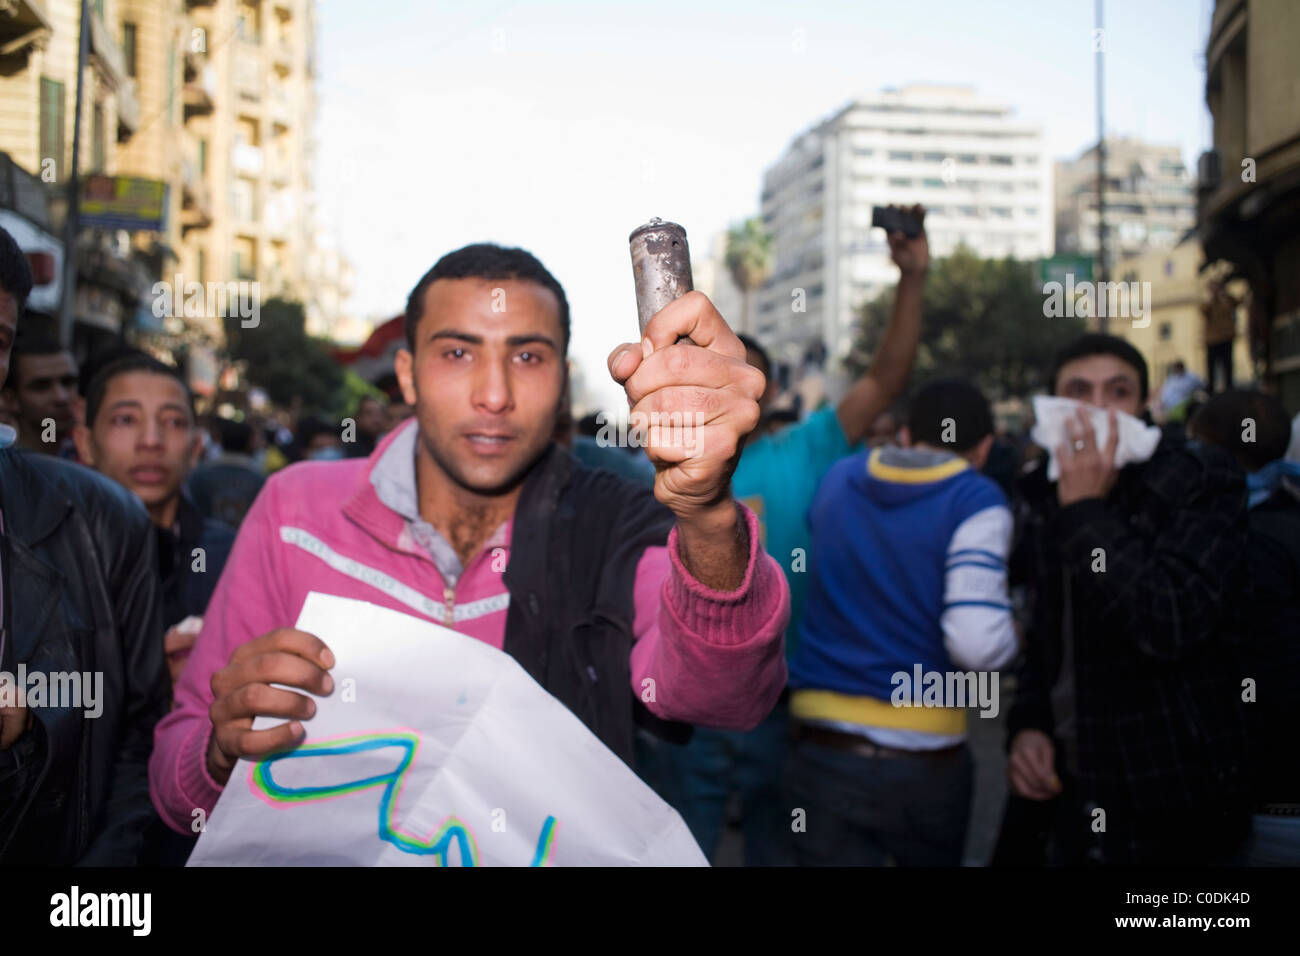 A man holds up a tear gas canister during the street protests in downtown Cairo, Egypt on 'Angry Friday', Jan.28, 2011 Stock Photo